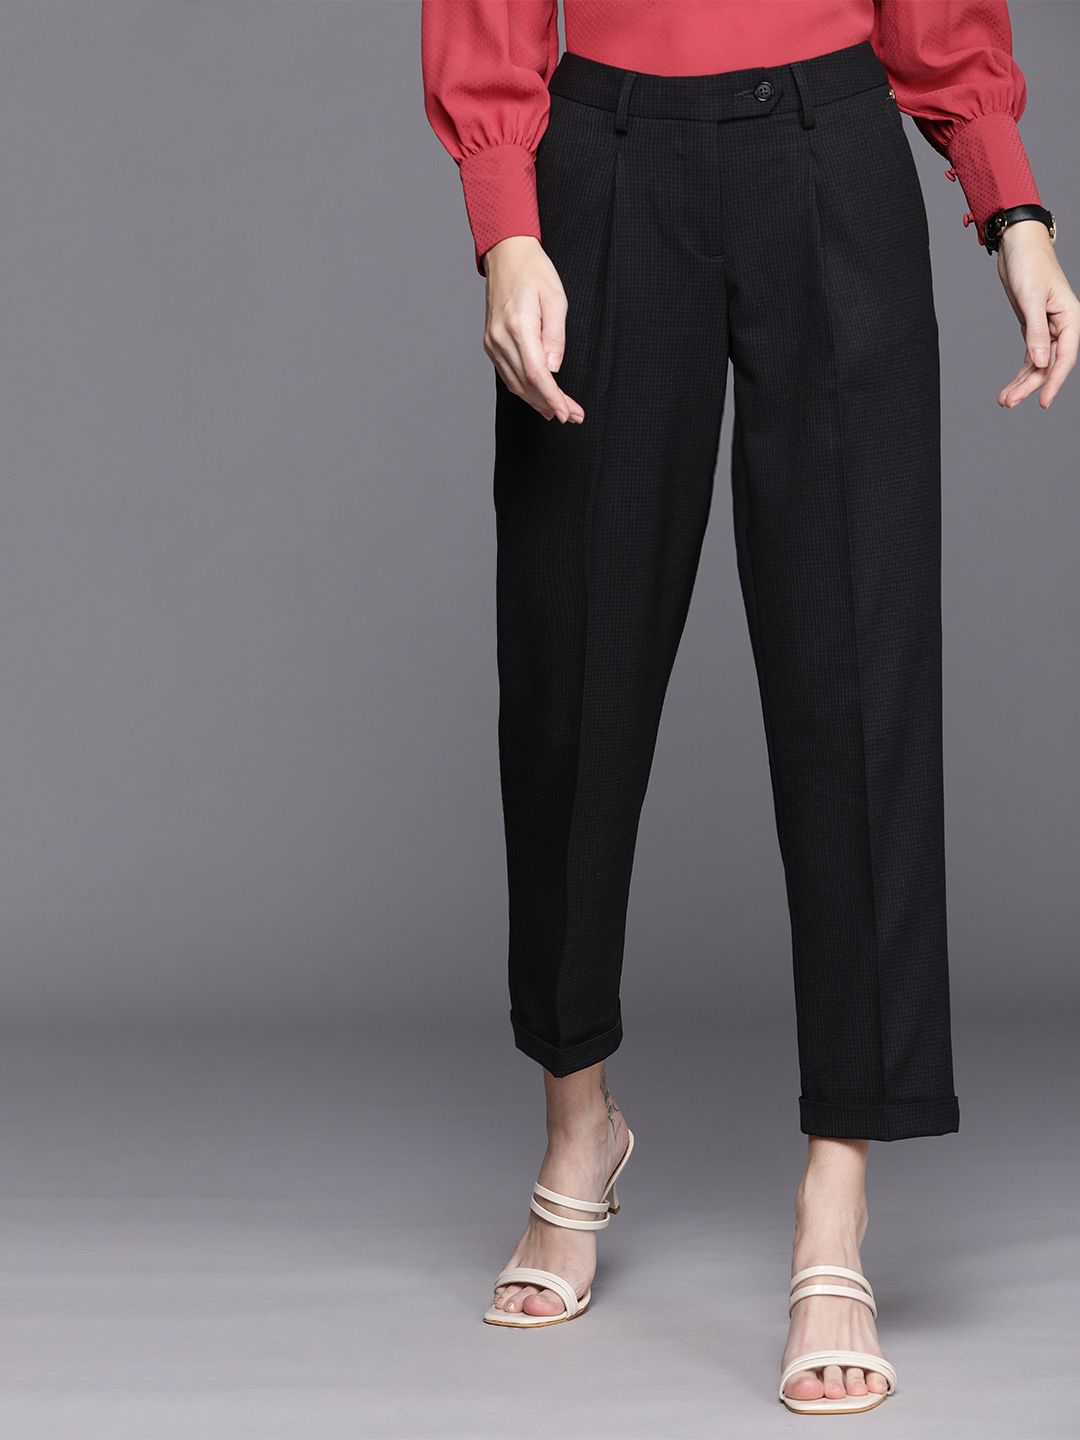 Allen Solly Woman Women Black Checked High-Rise Pleated Trousers Price in India